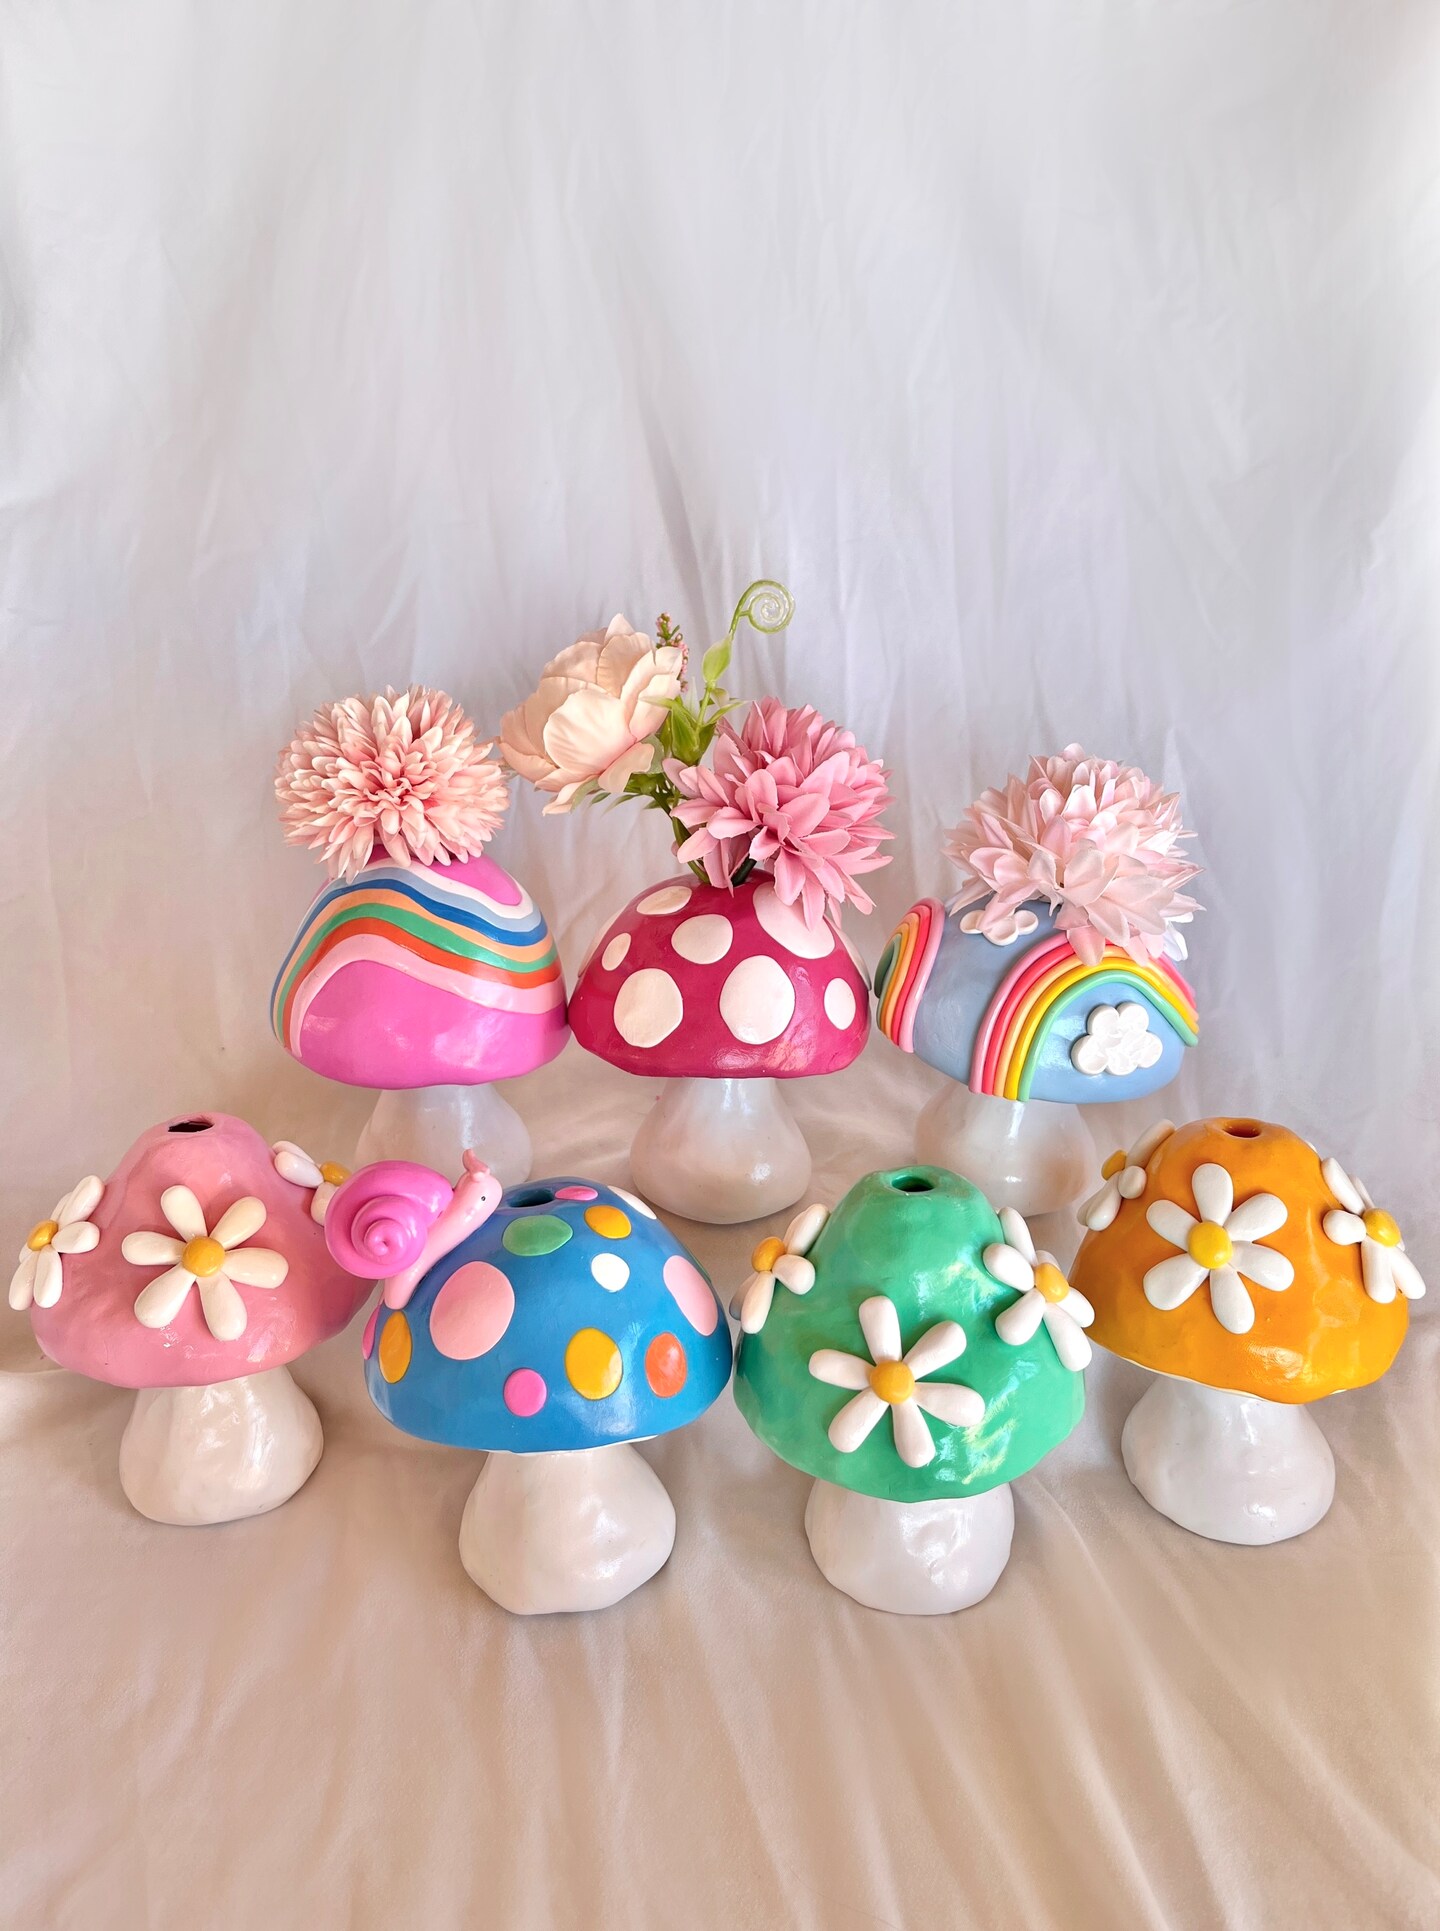 Colorful Mushroom Vase, Retro Cottagecore Mushrooms, Cute Home Decor, Colorful Home Decor, Quirky Home Accents, Funky Vases, Flower Pot 264812080301506560